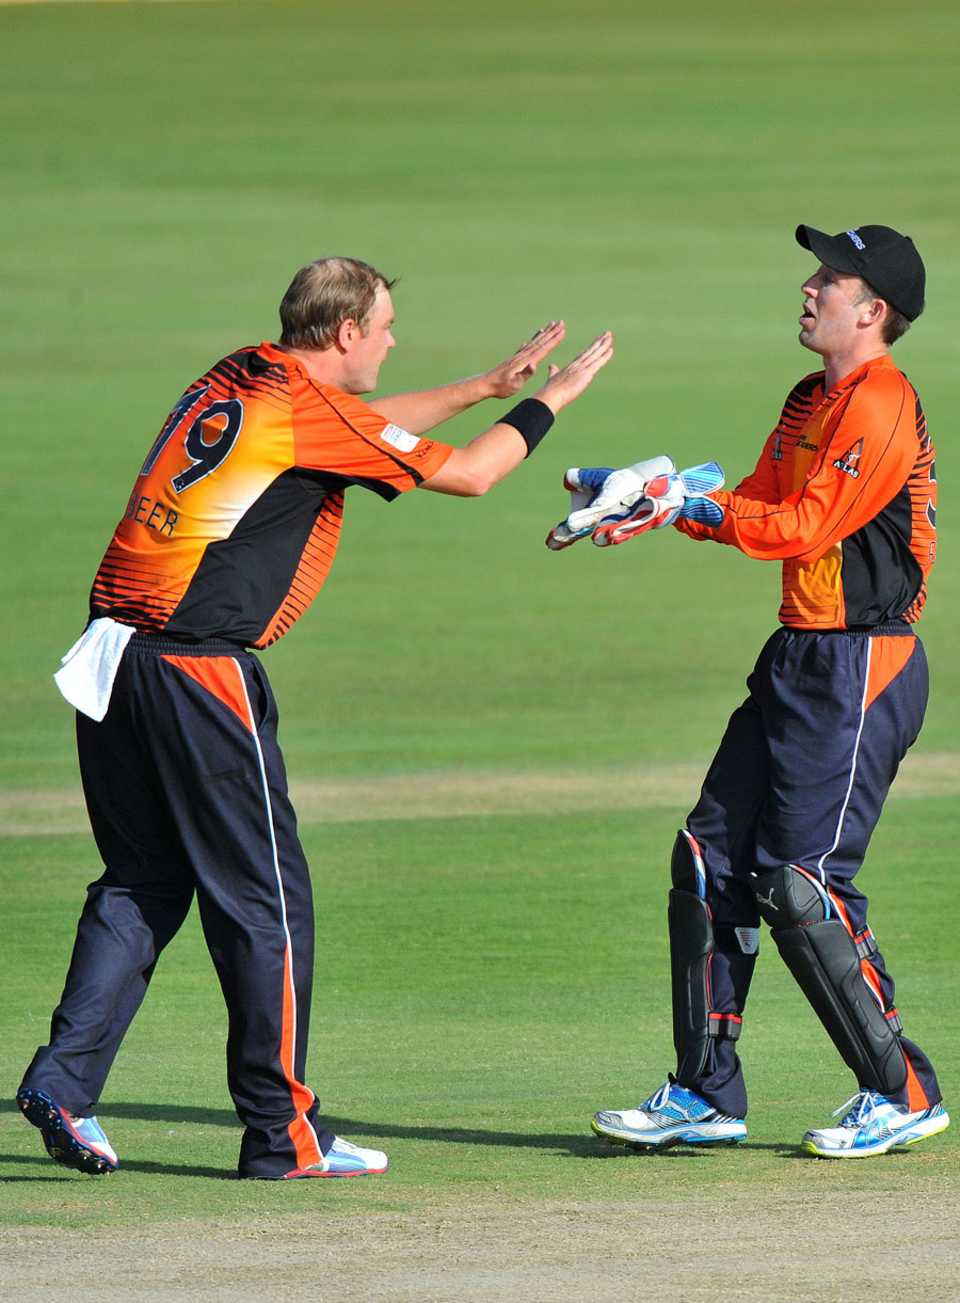 Michael Beer celebrates a wicket with Luke Ronchi, Auckland Aces v Perth Scorchers, Champions League T20, Centurion, October 23, 2012